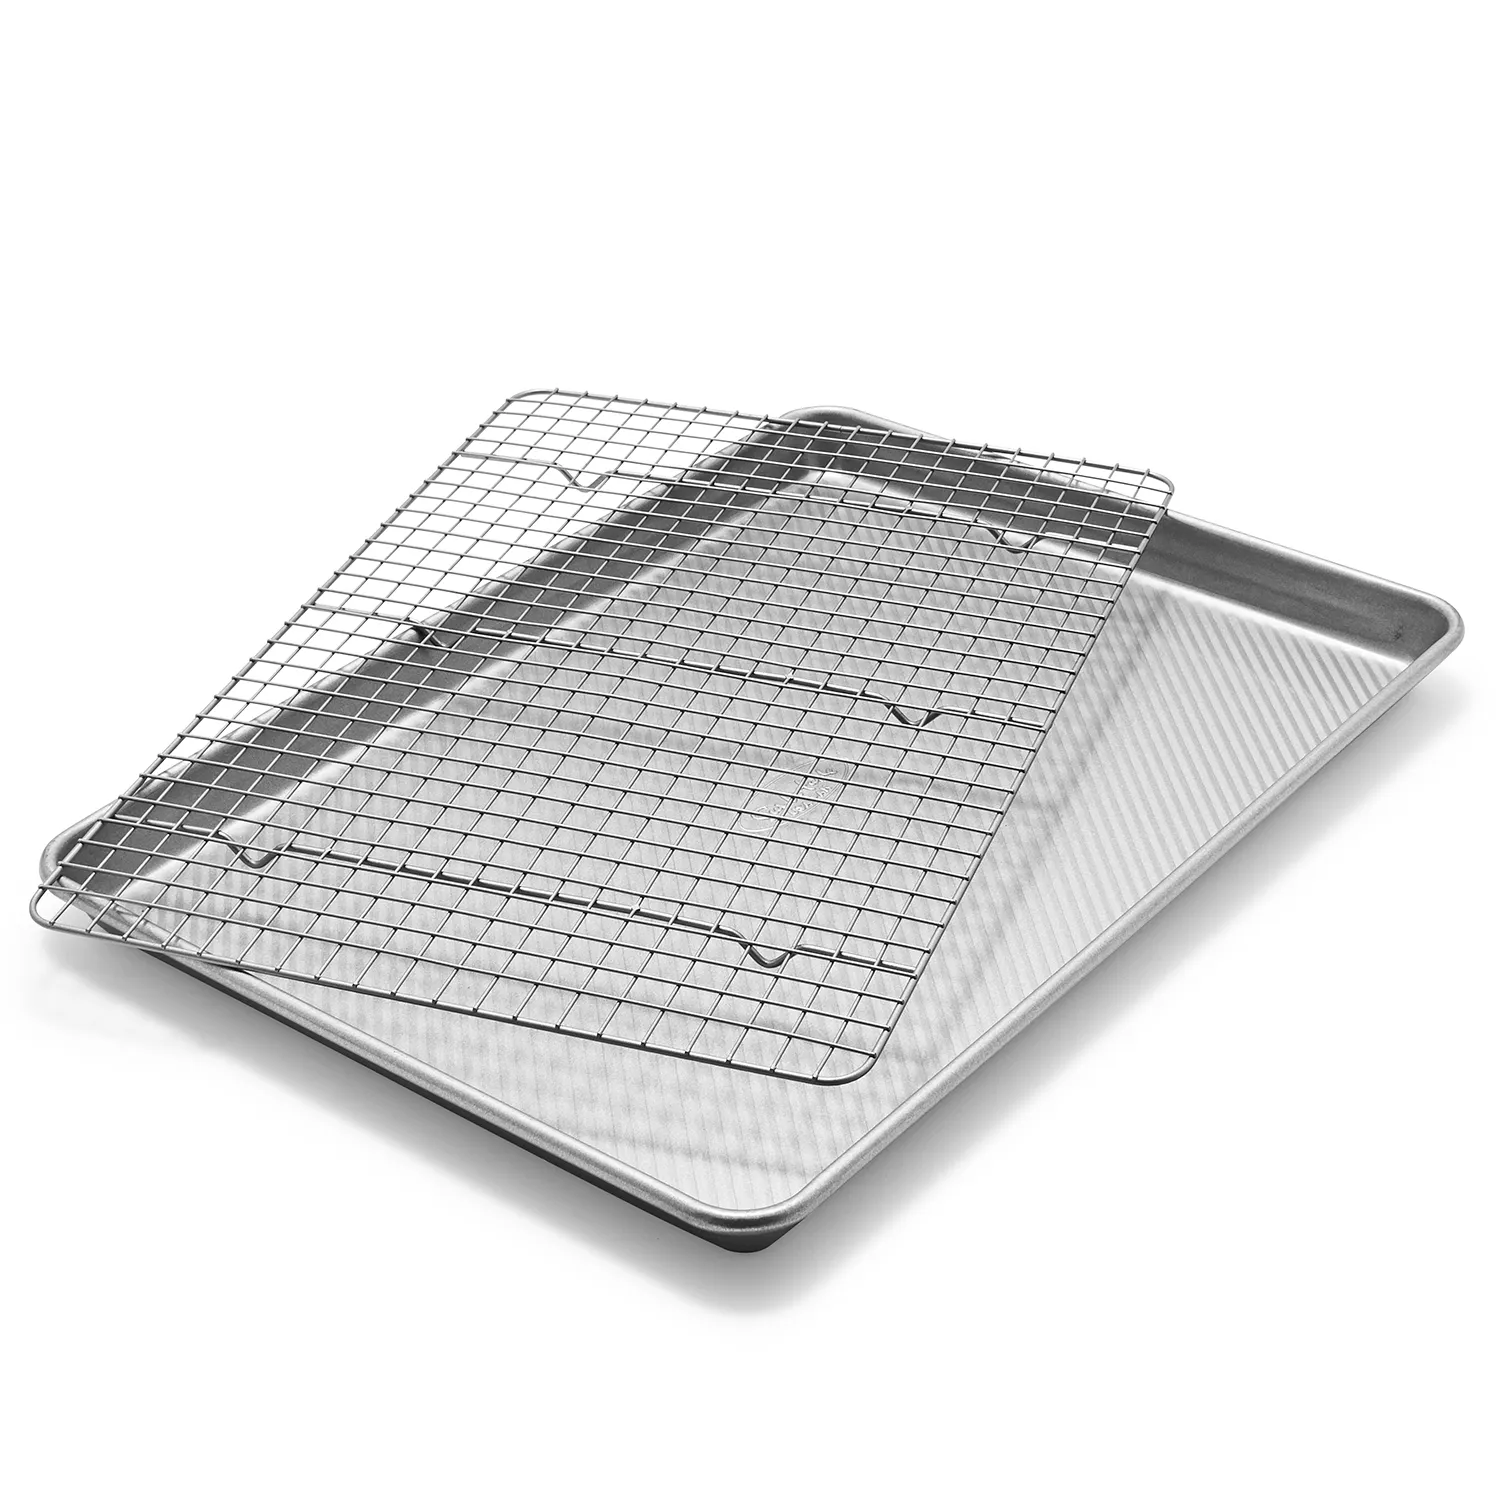 Nordic Ware Extra Large Oven Crisping Baking Tray, with Rack, Silver 